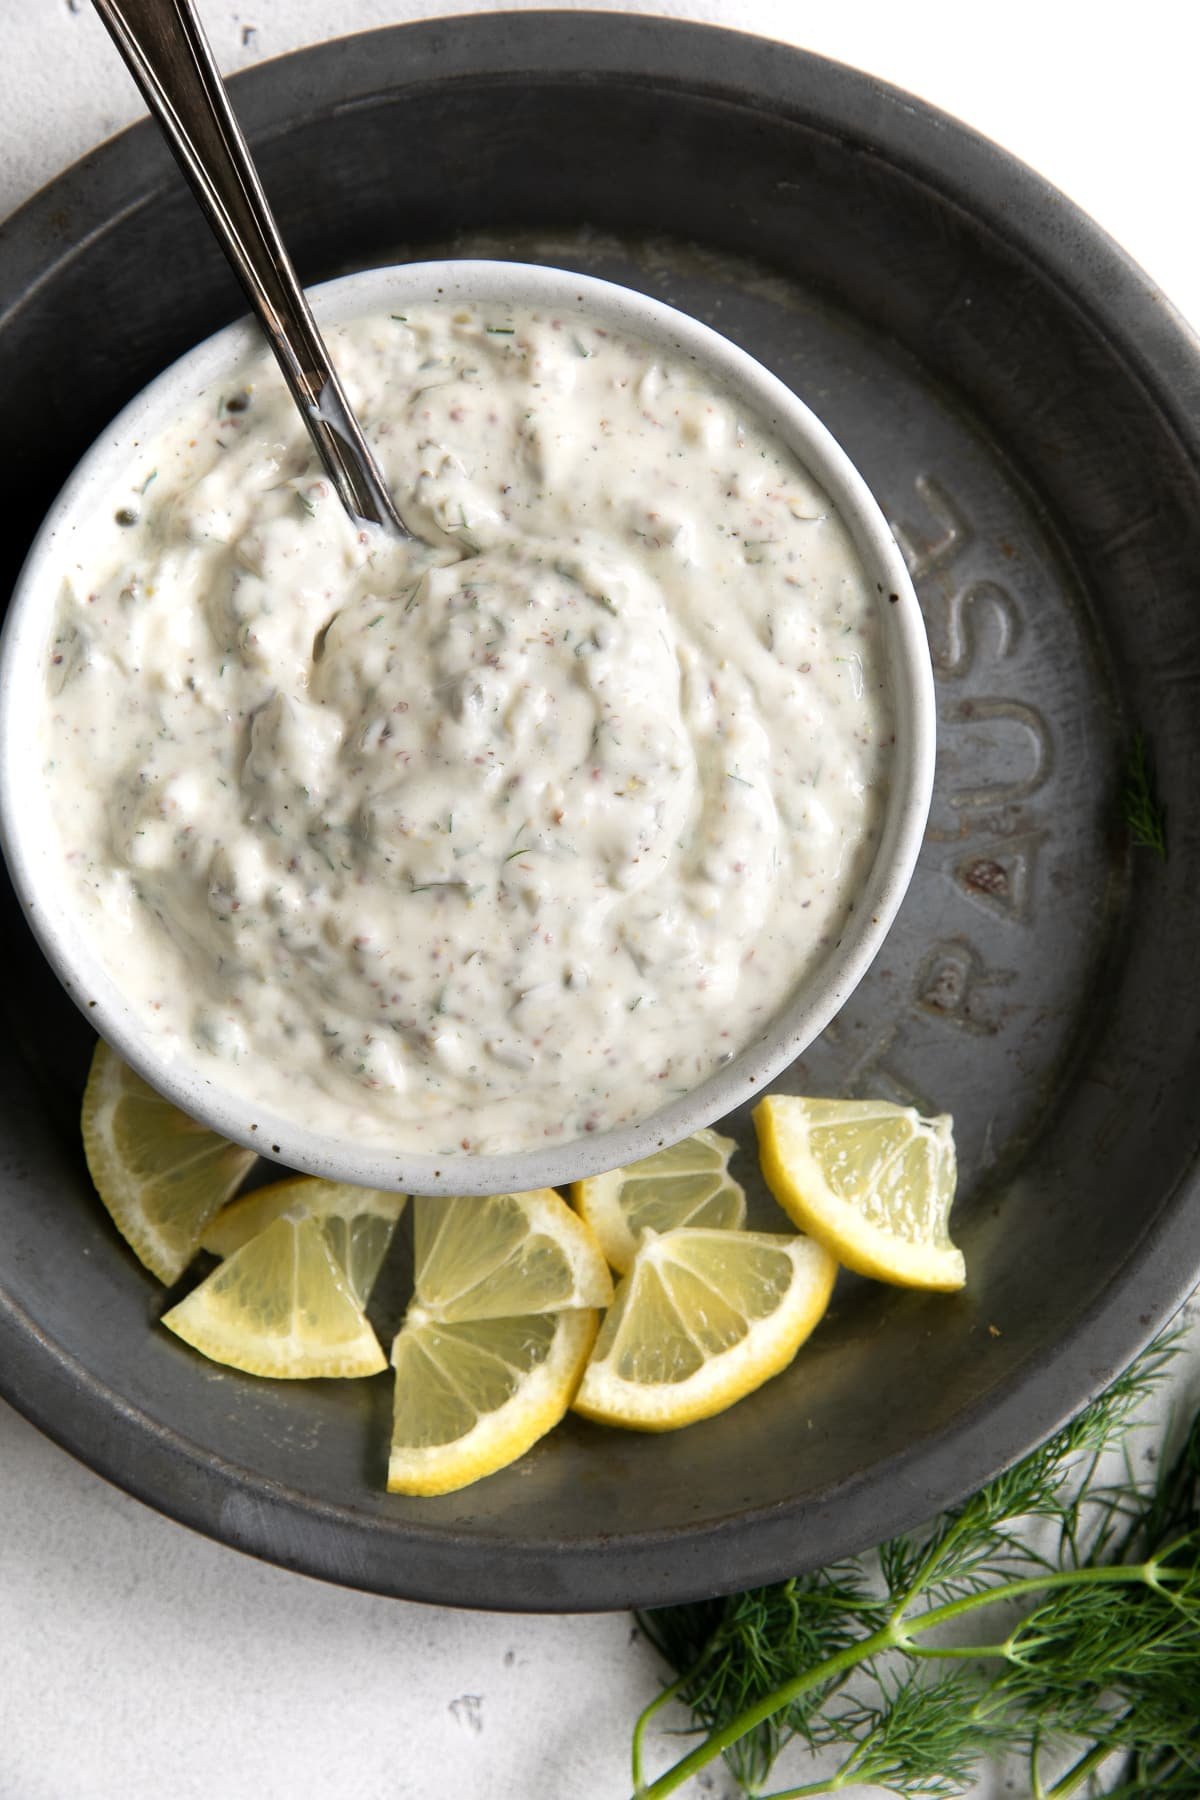 Tartar sauce in a small white serving dish on an aluminum pan.